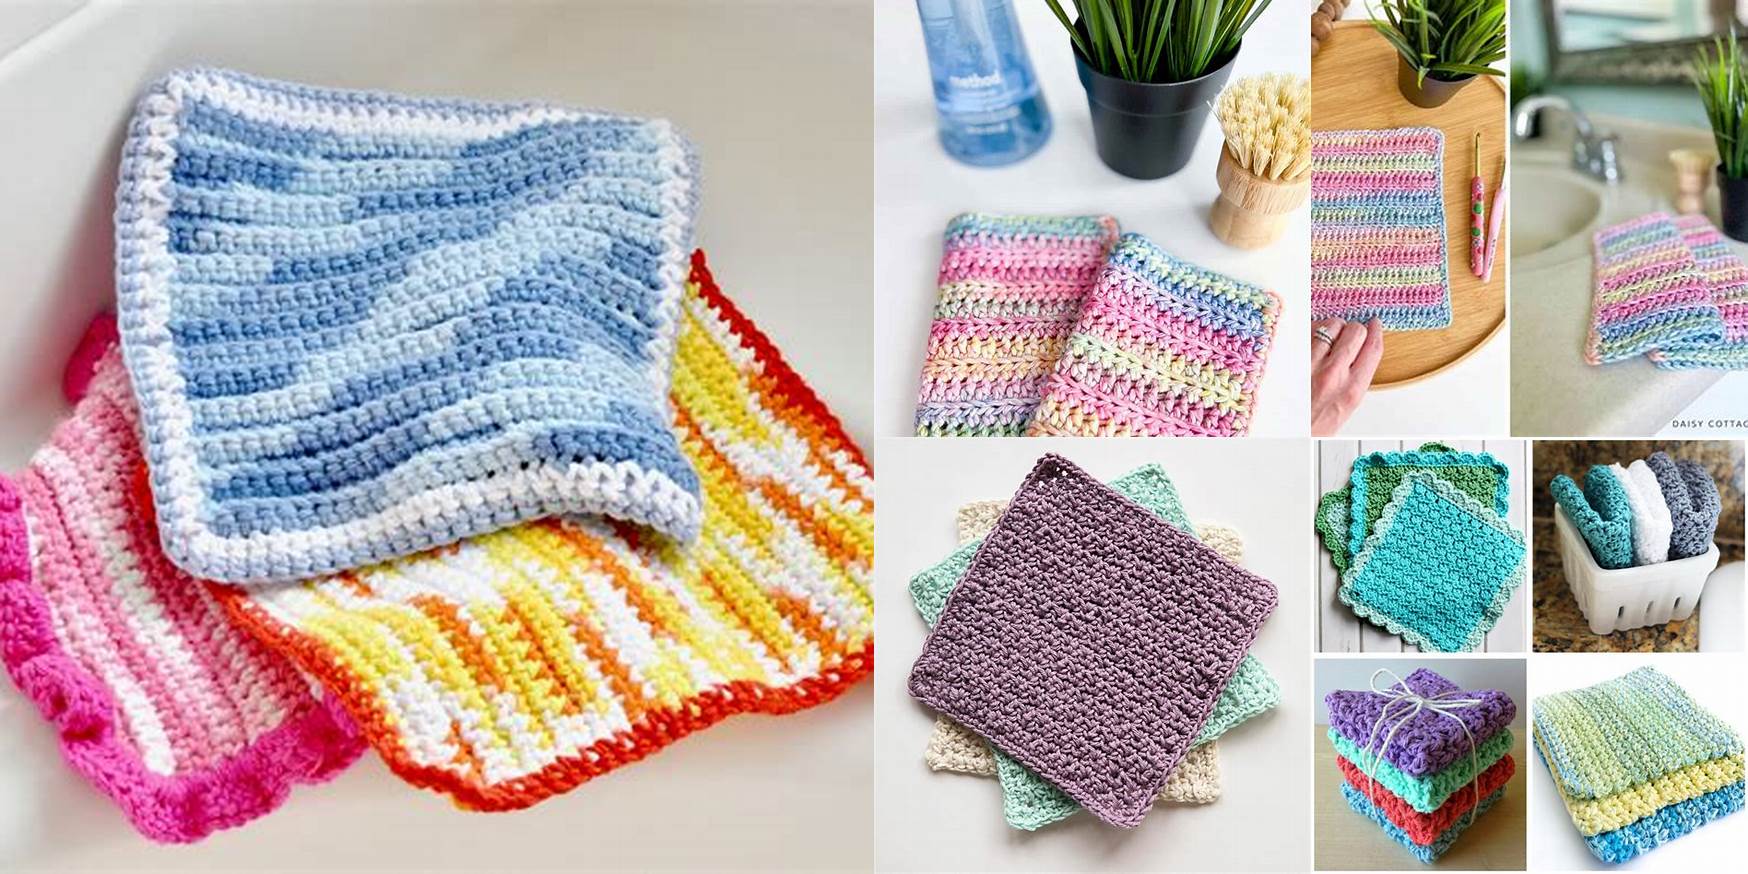 How To Crochet A Wash Cloth